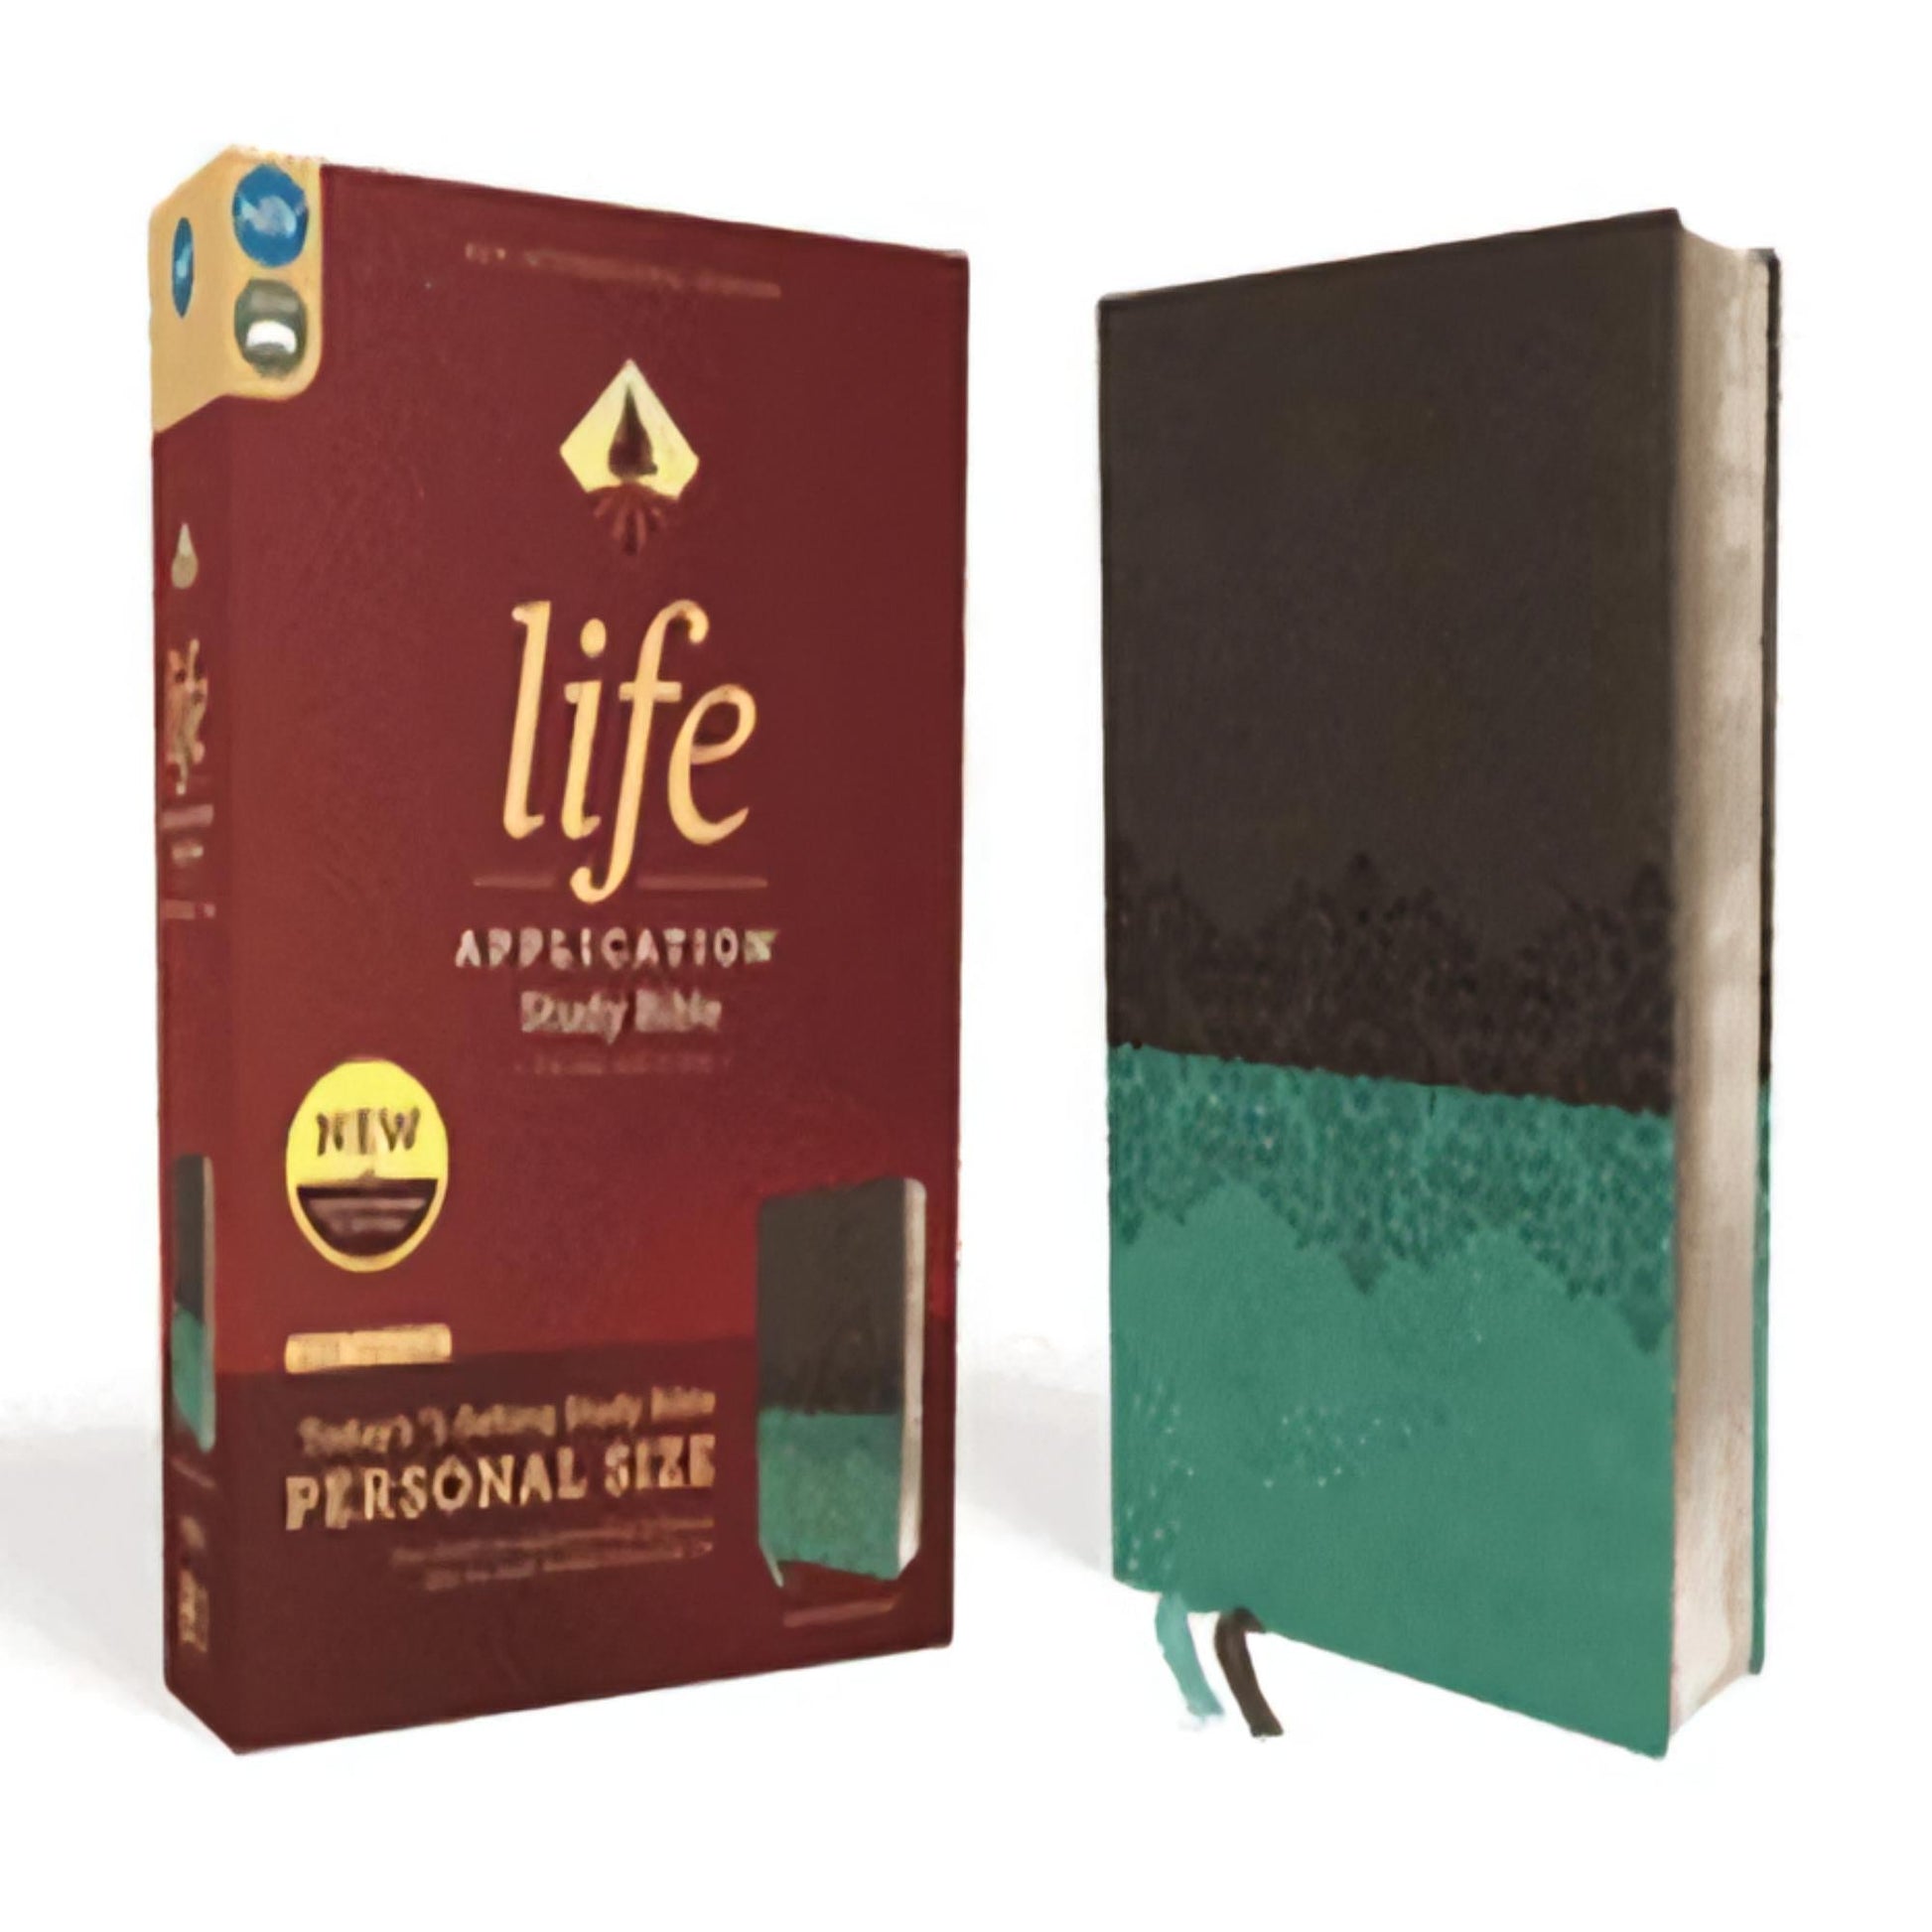 TEXTBOOK NIV, Life Application Study Bible, Third Edition, Personal Size, Leathersoft, Gray/Teal, Red Letter Edition (NIV Life Application Study Bible, Third Edition)68-021423-0310453046DPGBOOKSTORE.COM. Today's Bestsellers.